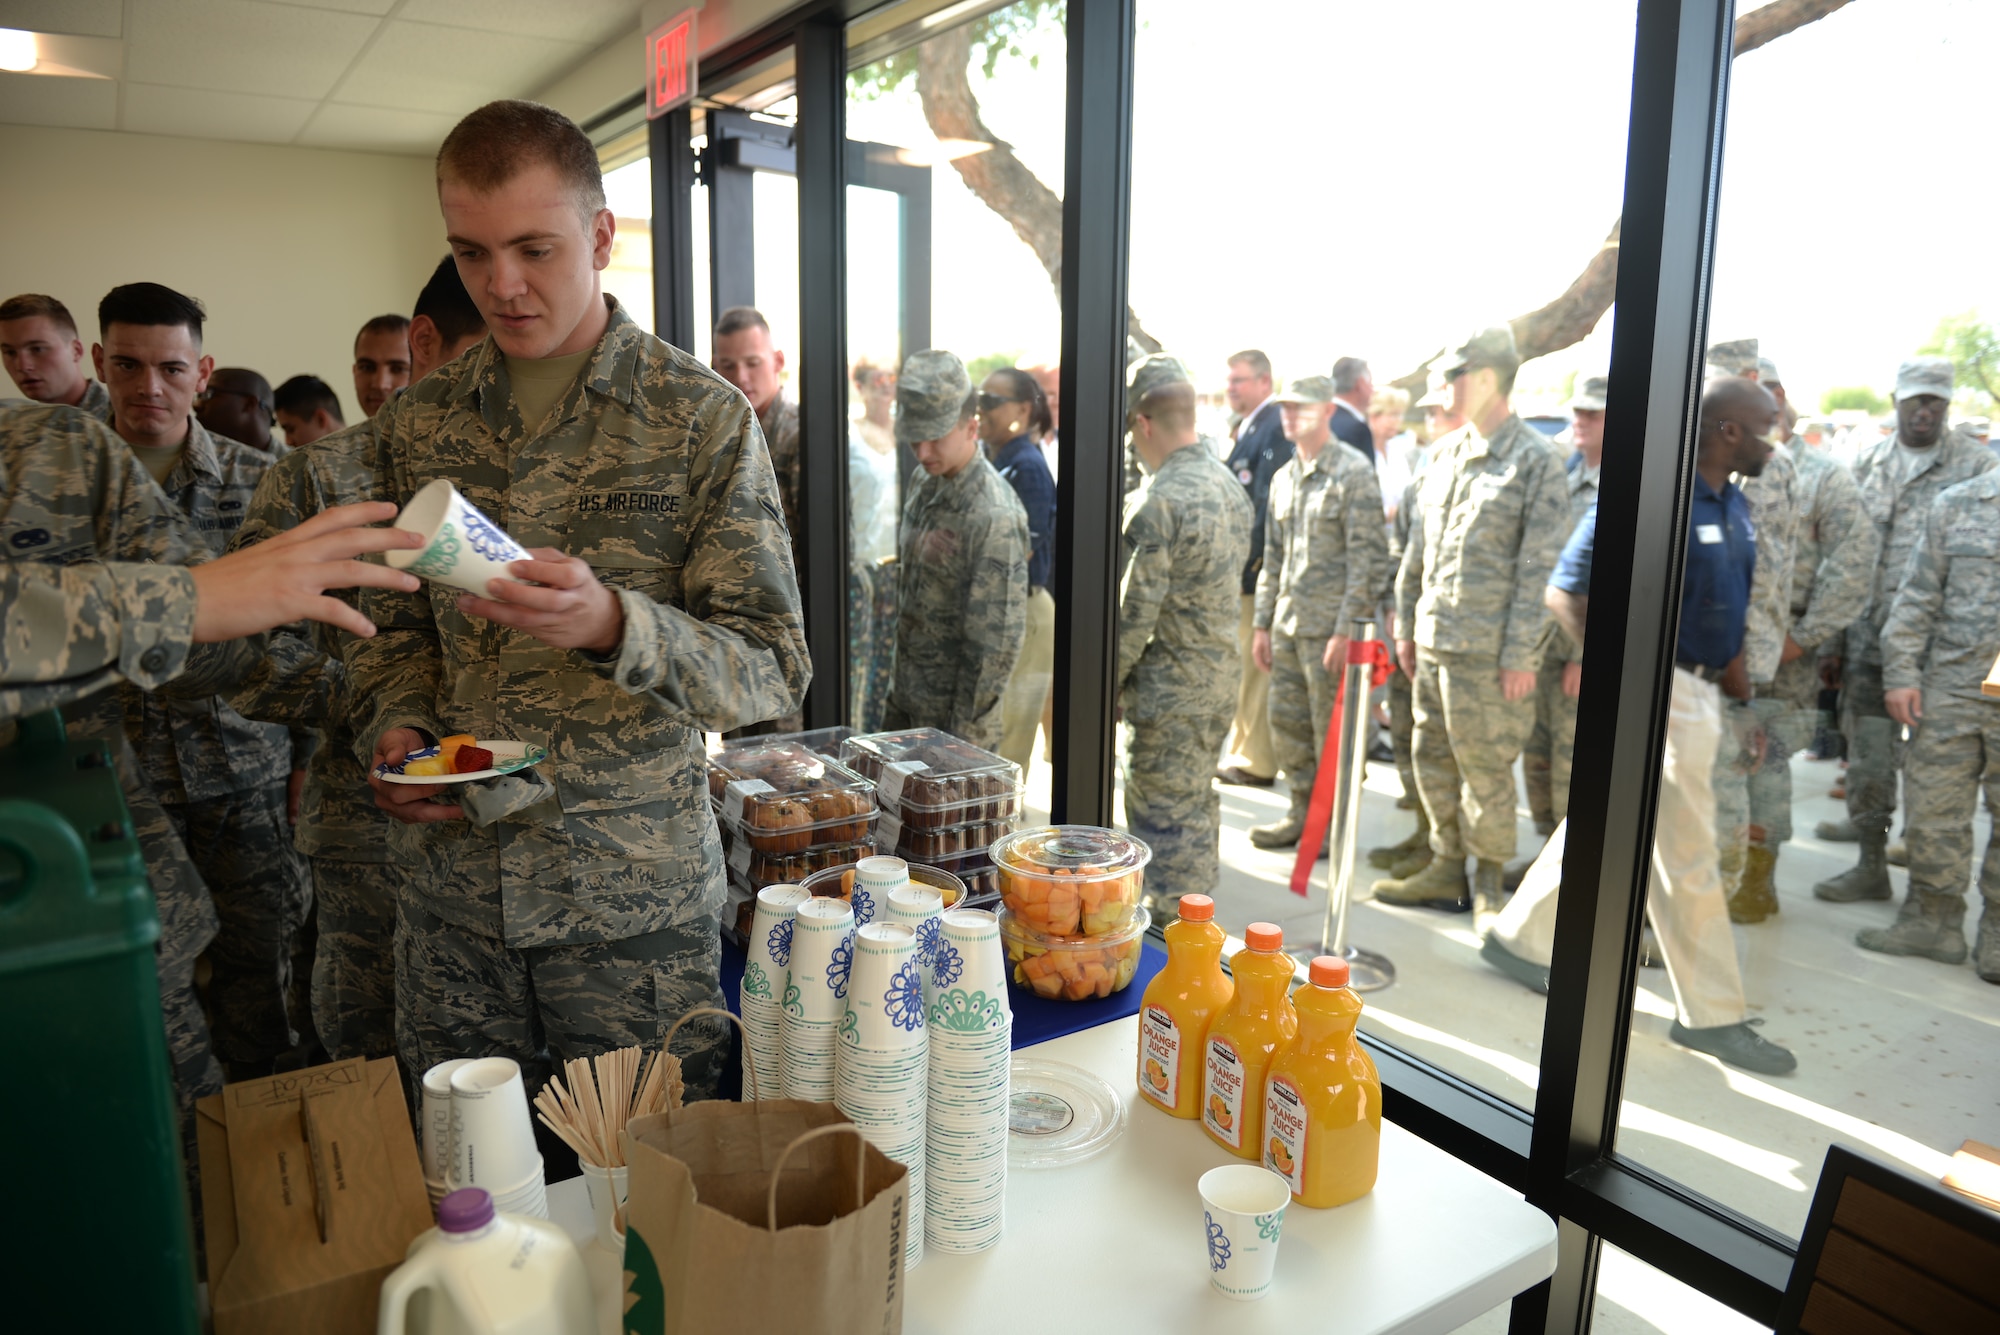 Airmen line up to get breakfast inside the flightline kitchen expansion shortly following its ribbon-cutting at Luke Air Force Base, Ariz., June 14, 2018. Airmen who work on the flightline can enjoy meals in the air conditioned expansion during long work shifts. (U.S. Air Force photo by Senior Airman Ridge Shan)